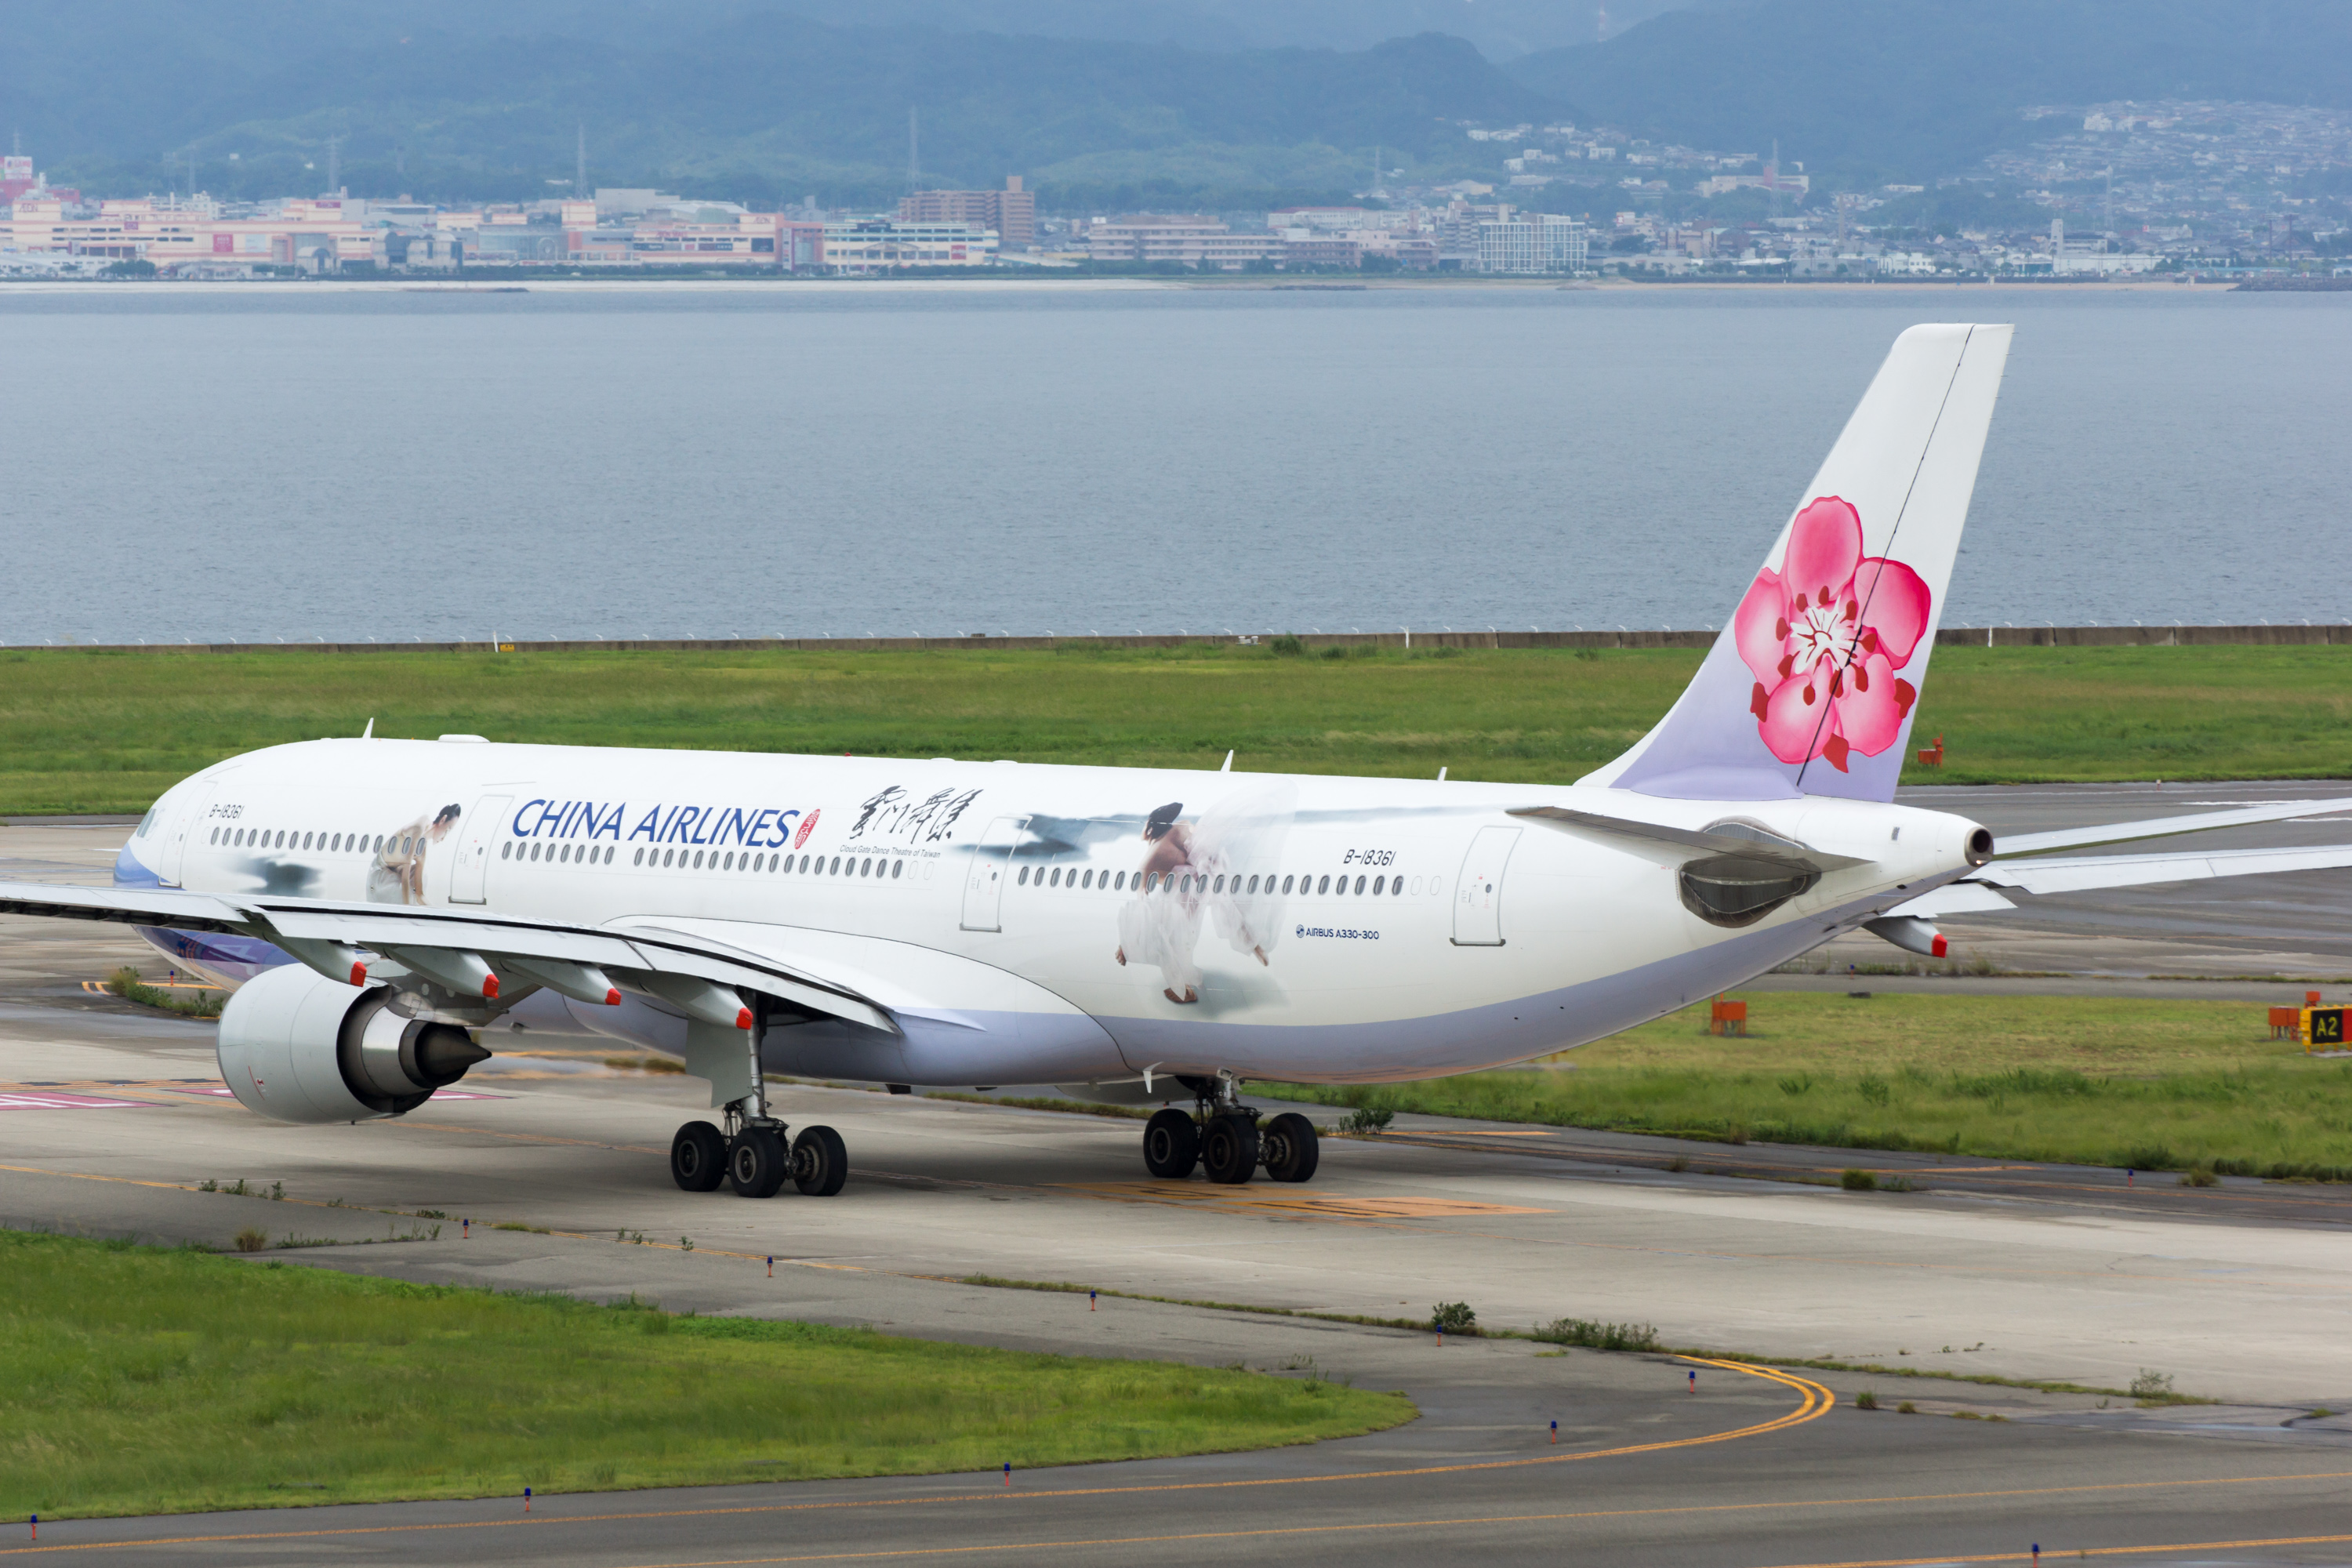 File:China Airlines, A330-300, B-18361 (20434219614).jpg 